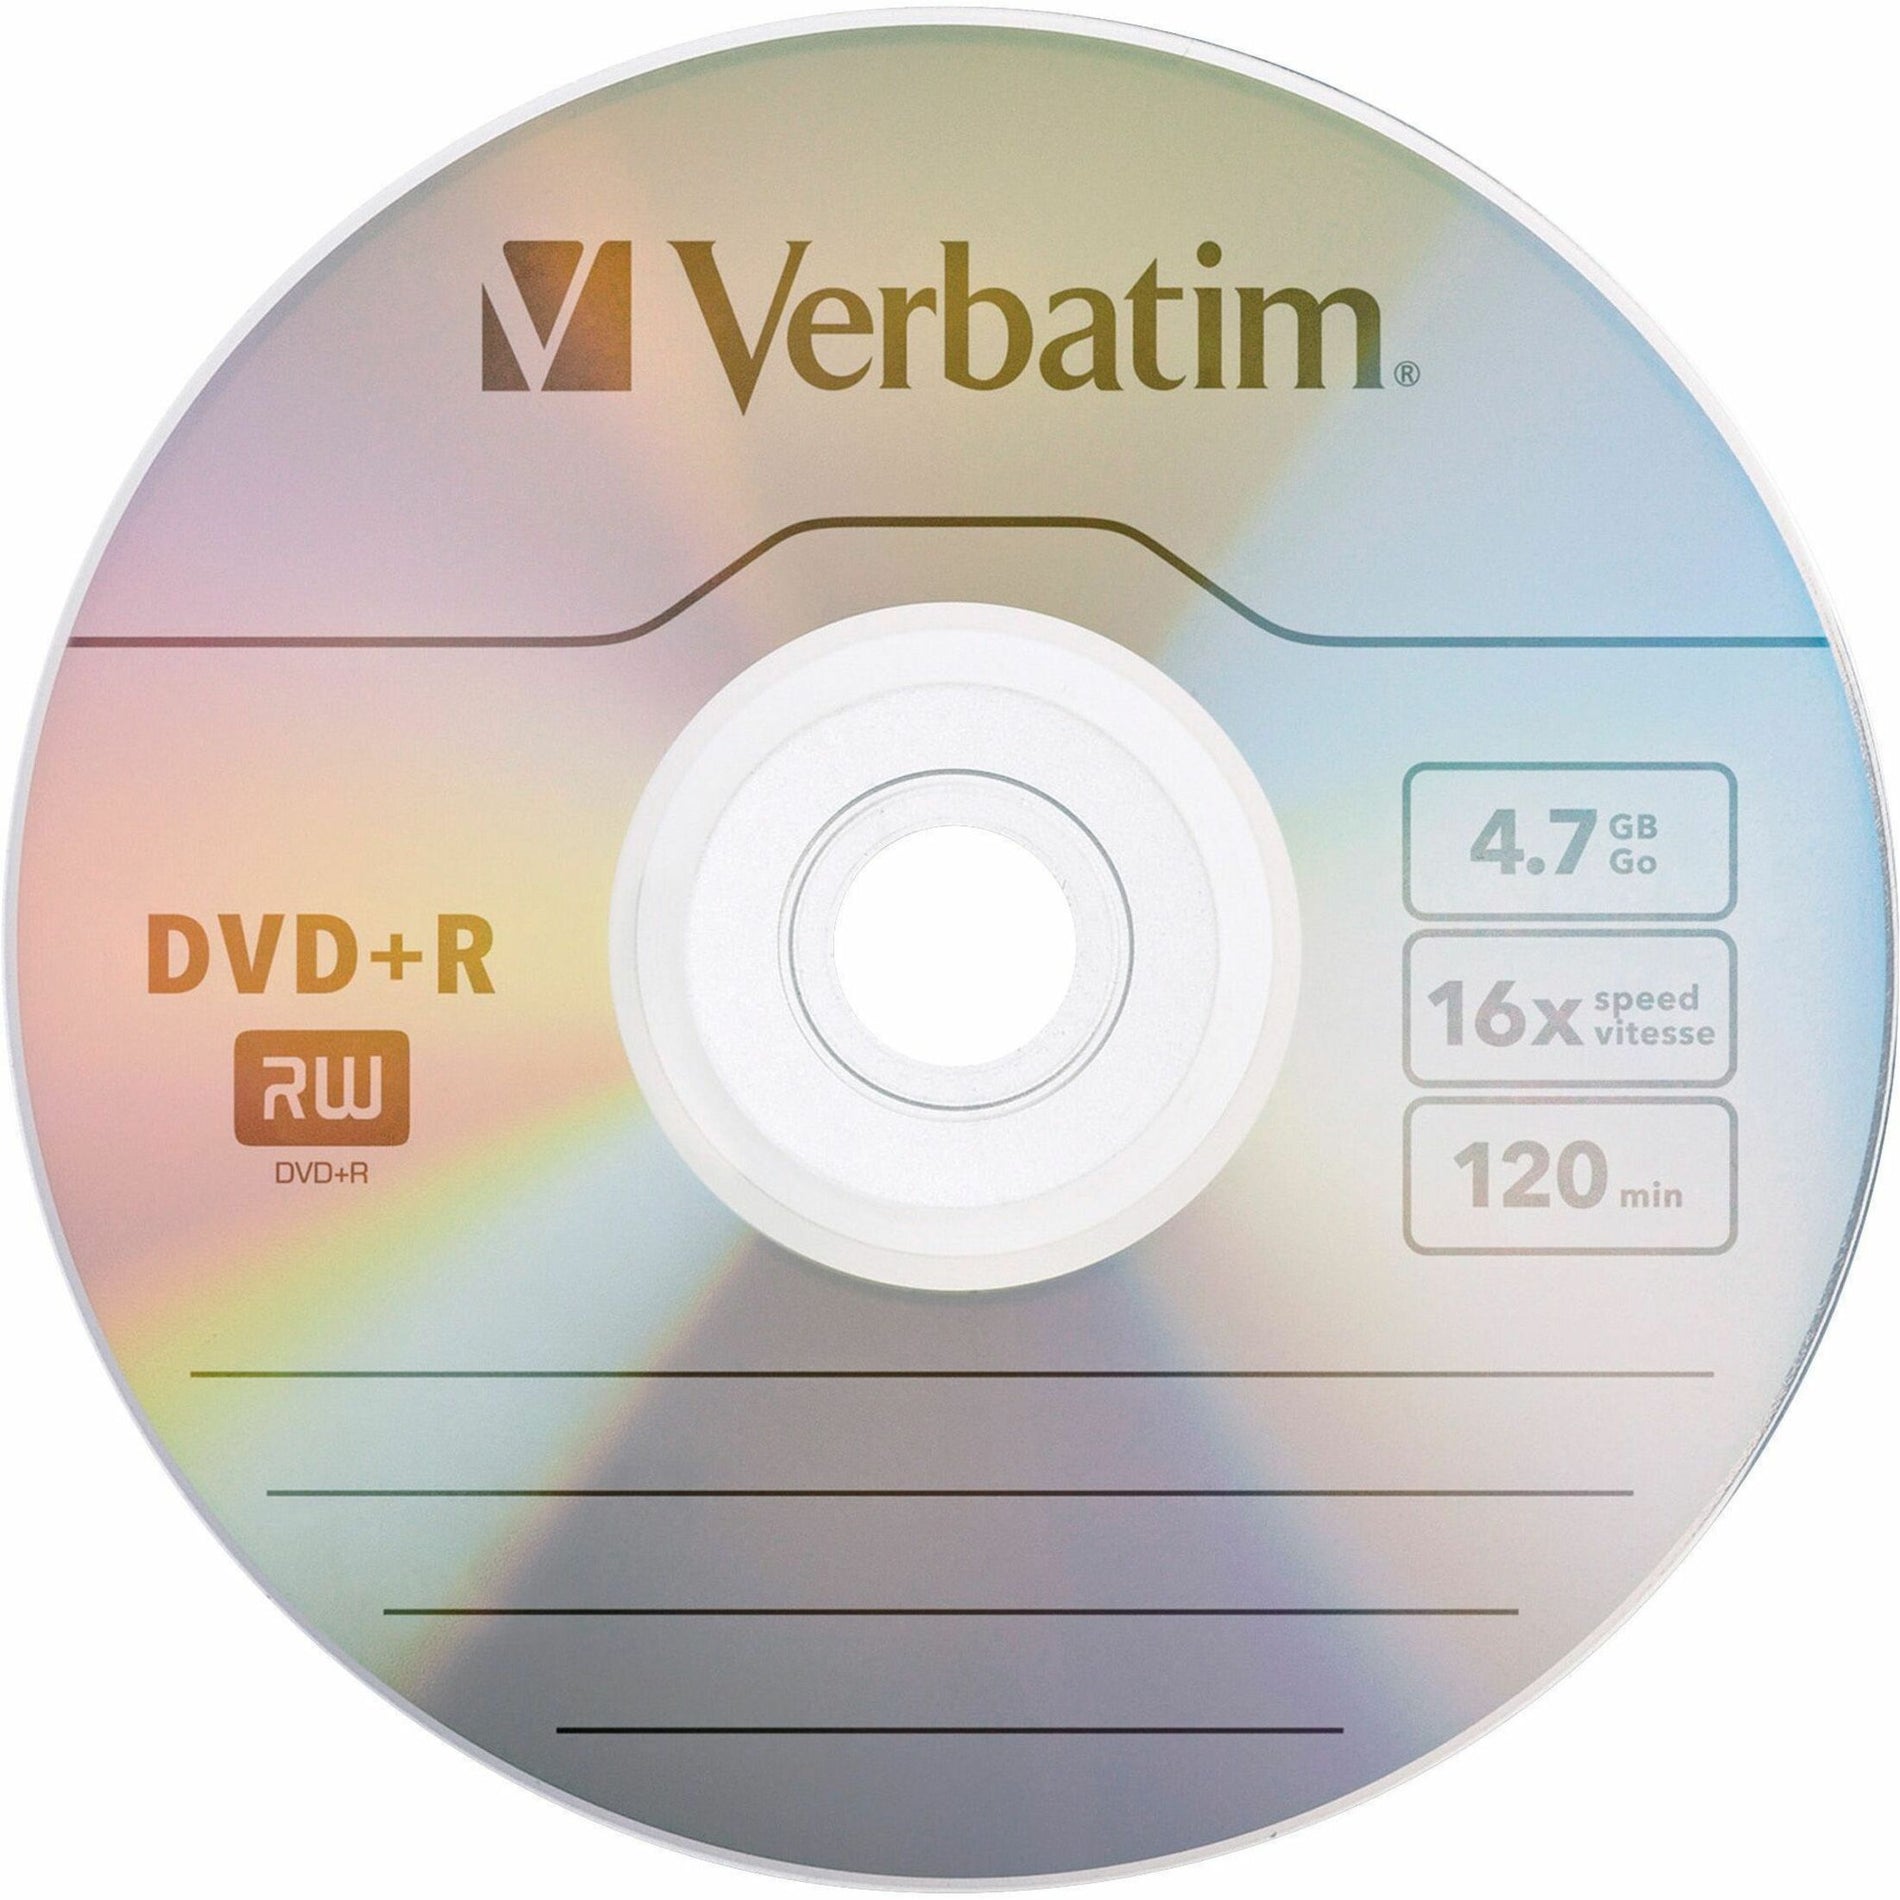 Verbatim 95098 AZO DVD+R 4.7GB 16X with Branded Surface - 100pk Spindle, 120 Minutes